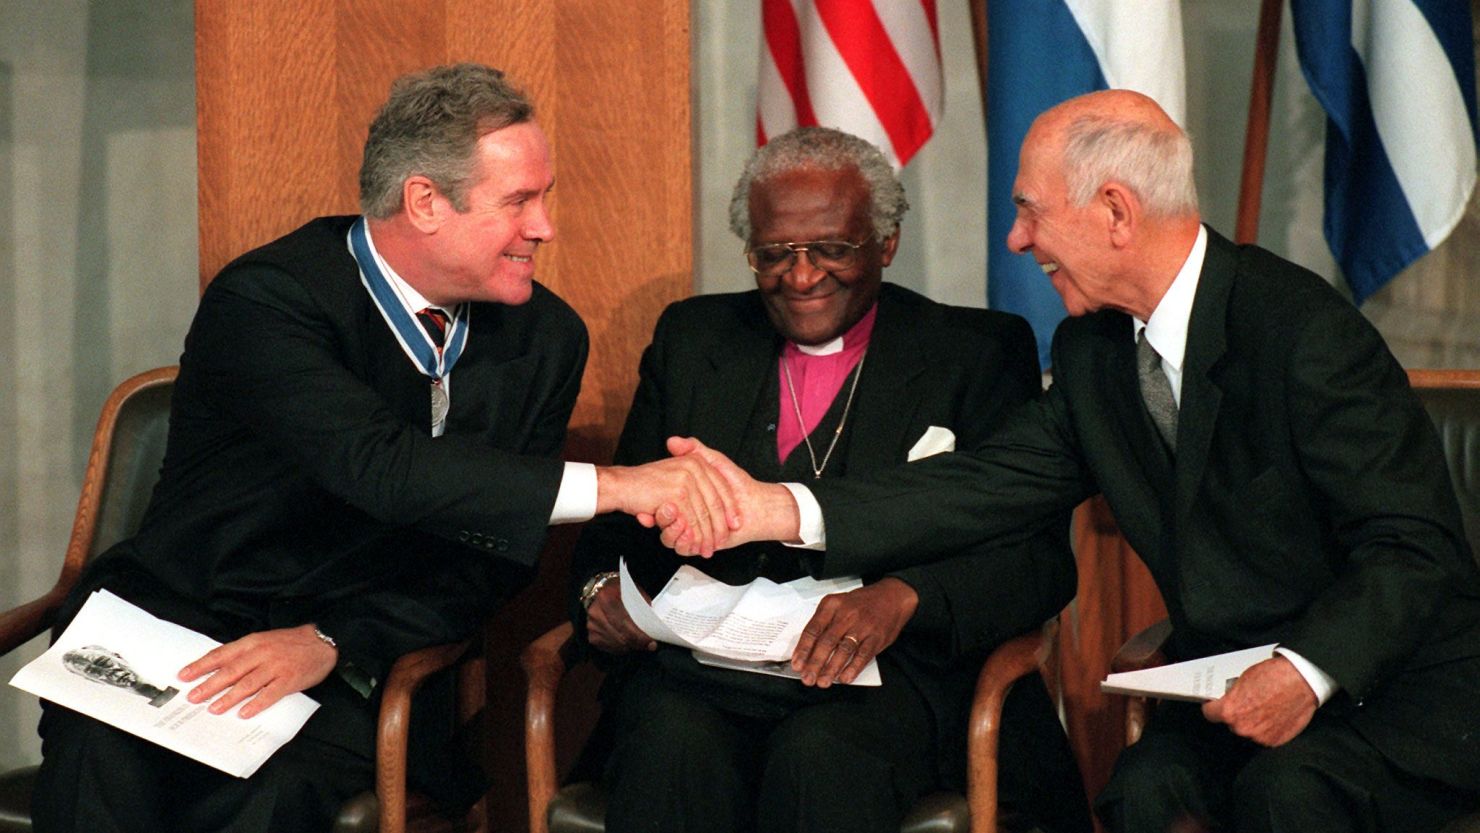 Chris Cramer (left), is congratulated by German-born former French ambassador Stephane Hessel (right) as Archbishop Desmond Tutu of South Africa smiles during a ceremony in the Netherlands in 1998 to present the Roosevelt Freedom Awards.